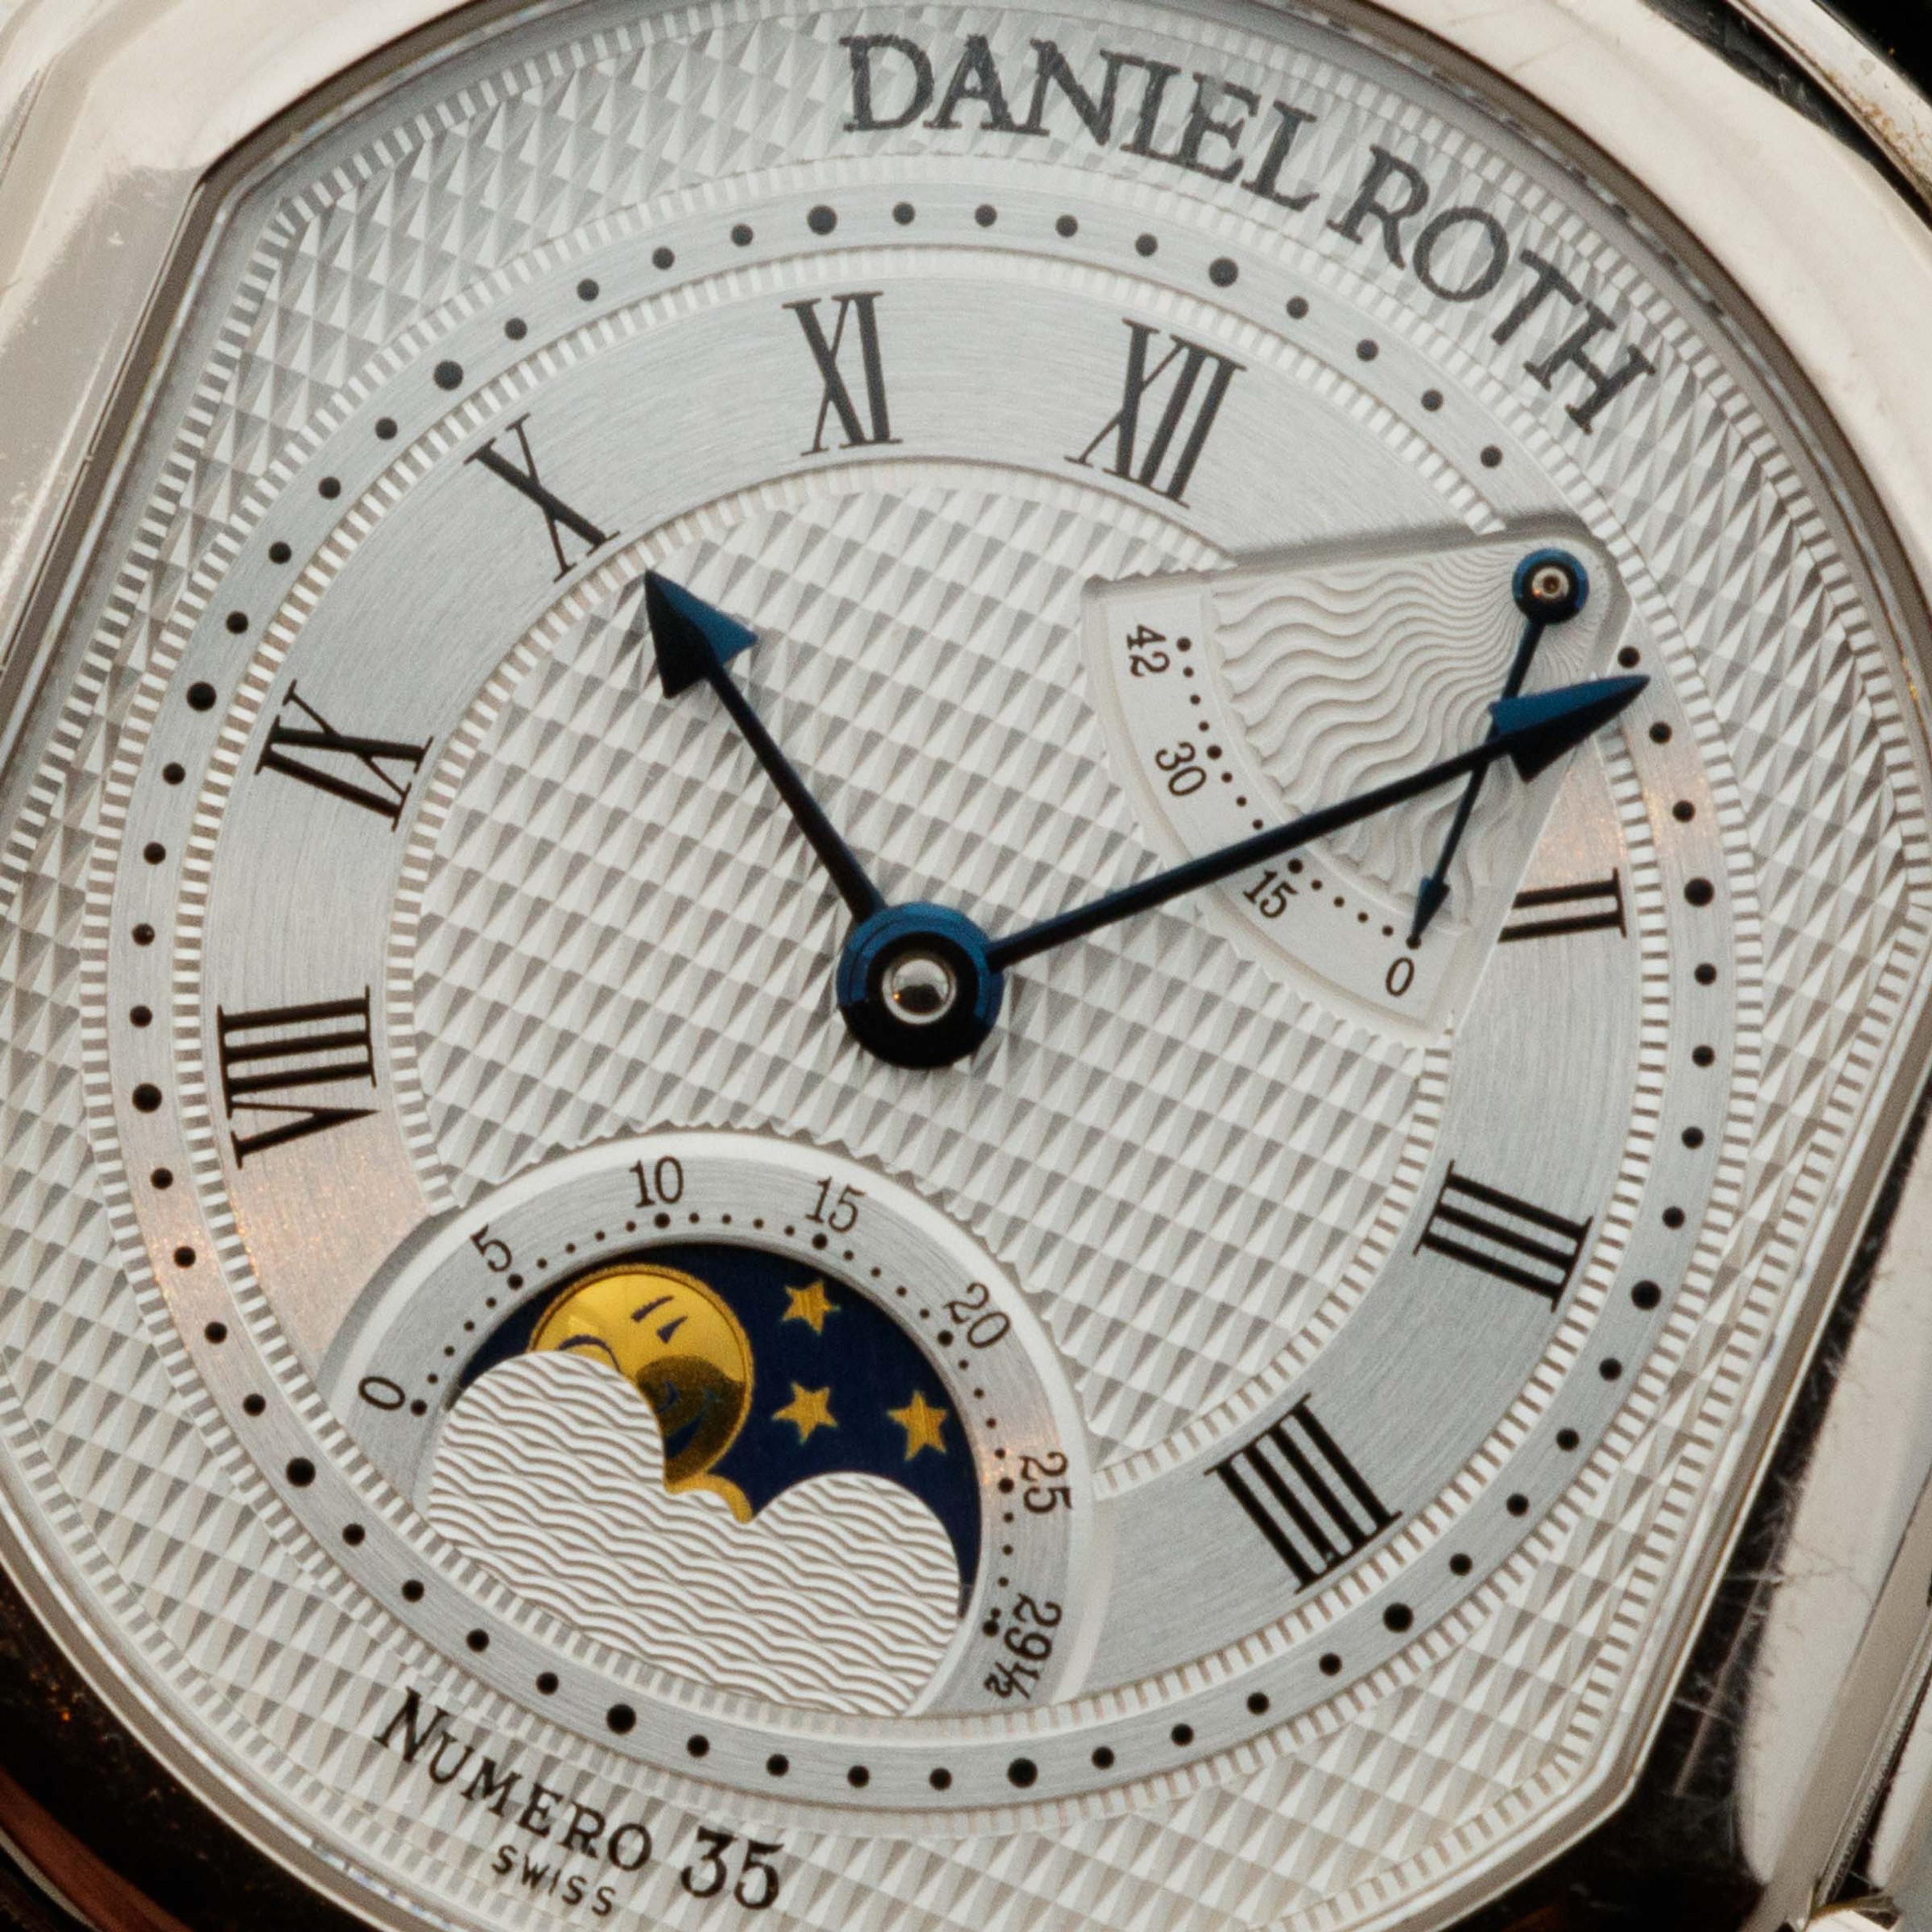 Daniel Roth Moon Phase Power Reserve 0357BCSL | Auctions | Loupe This